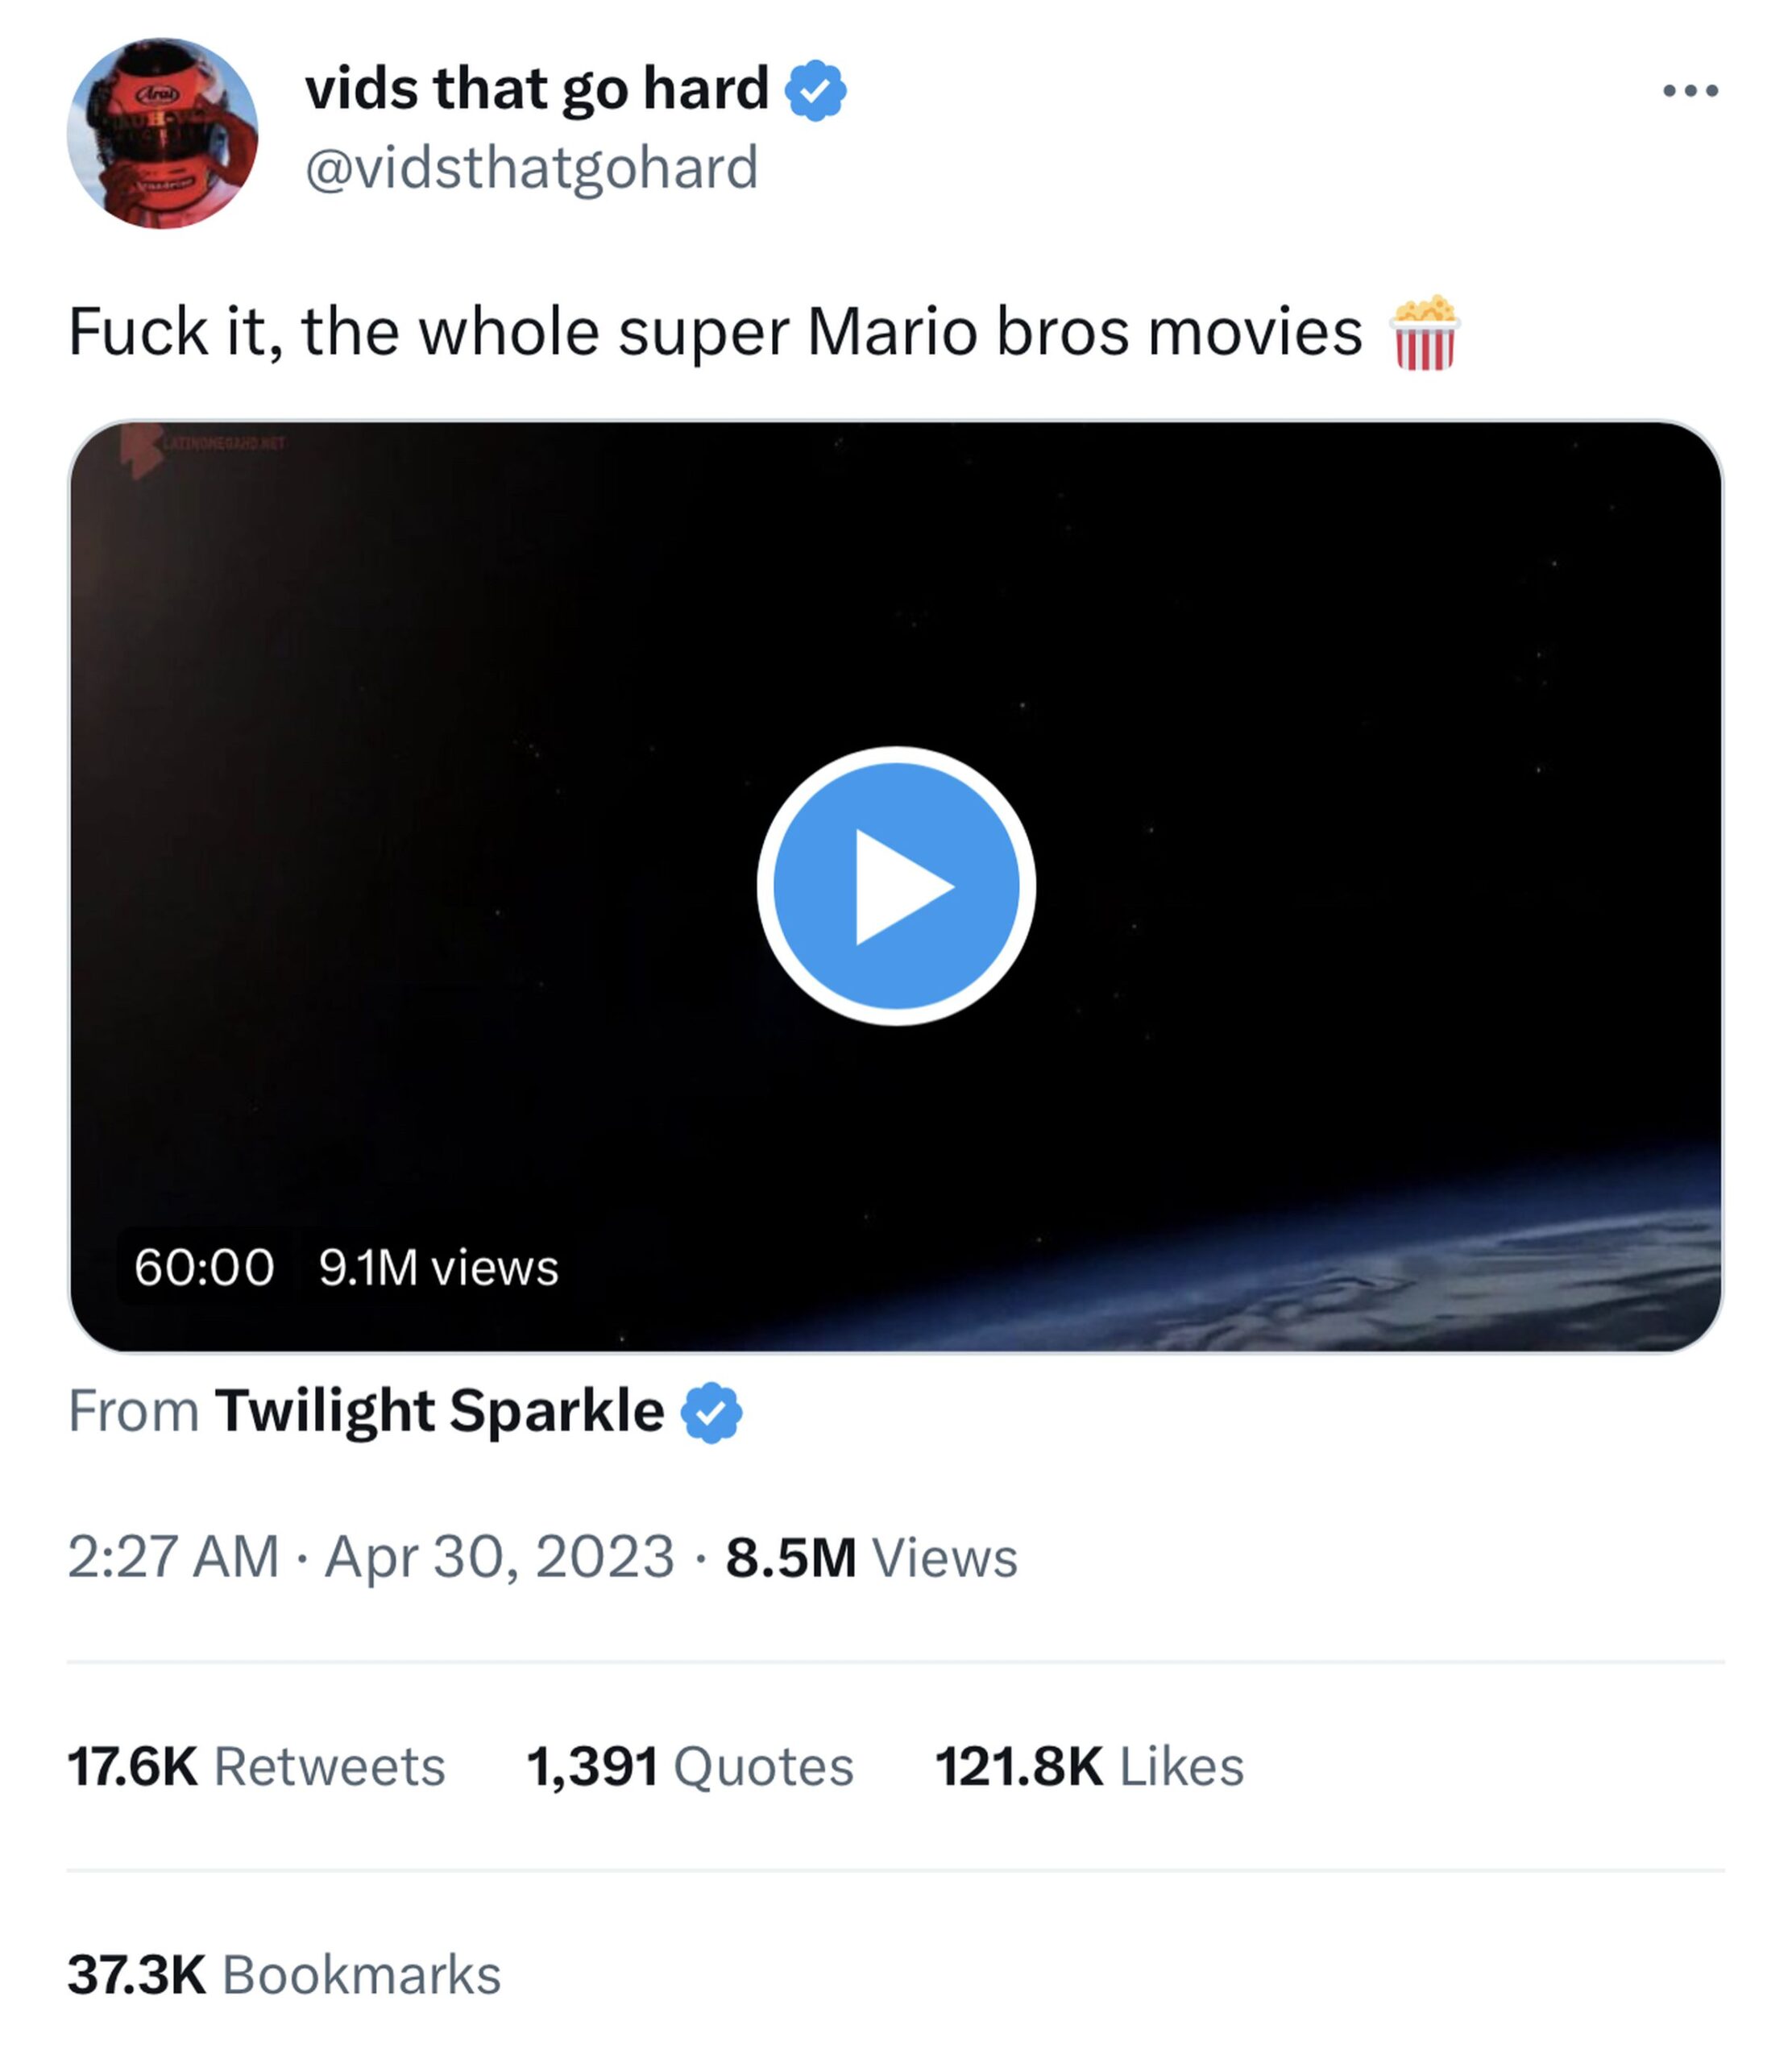 A post of the entire Super Mario Bros movie on Twitter with 8.5 million views